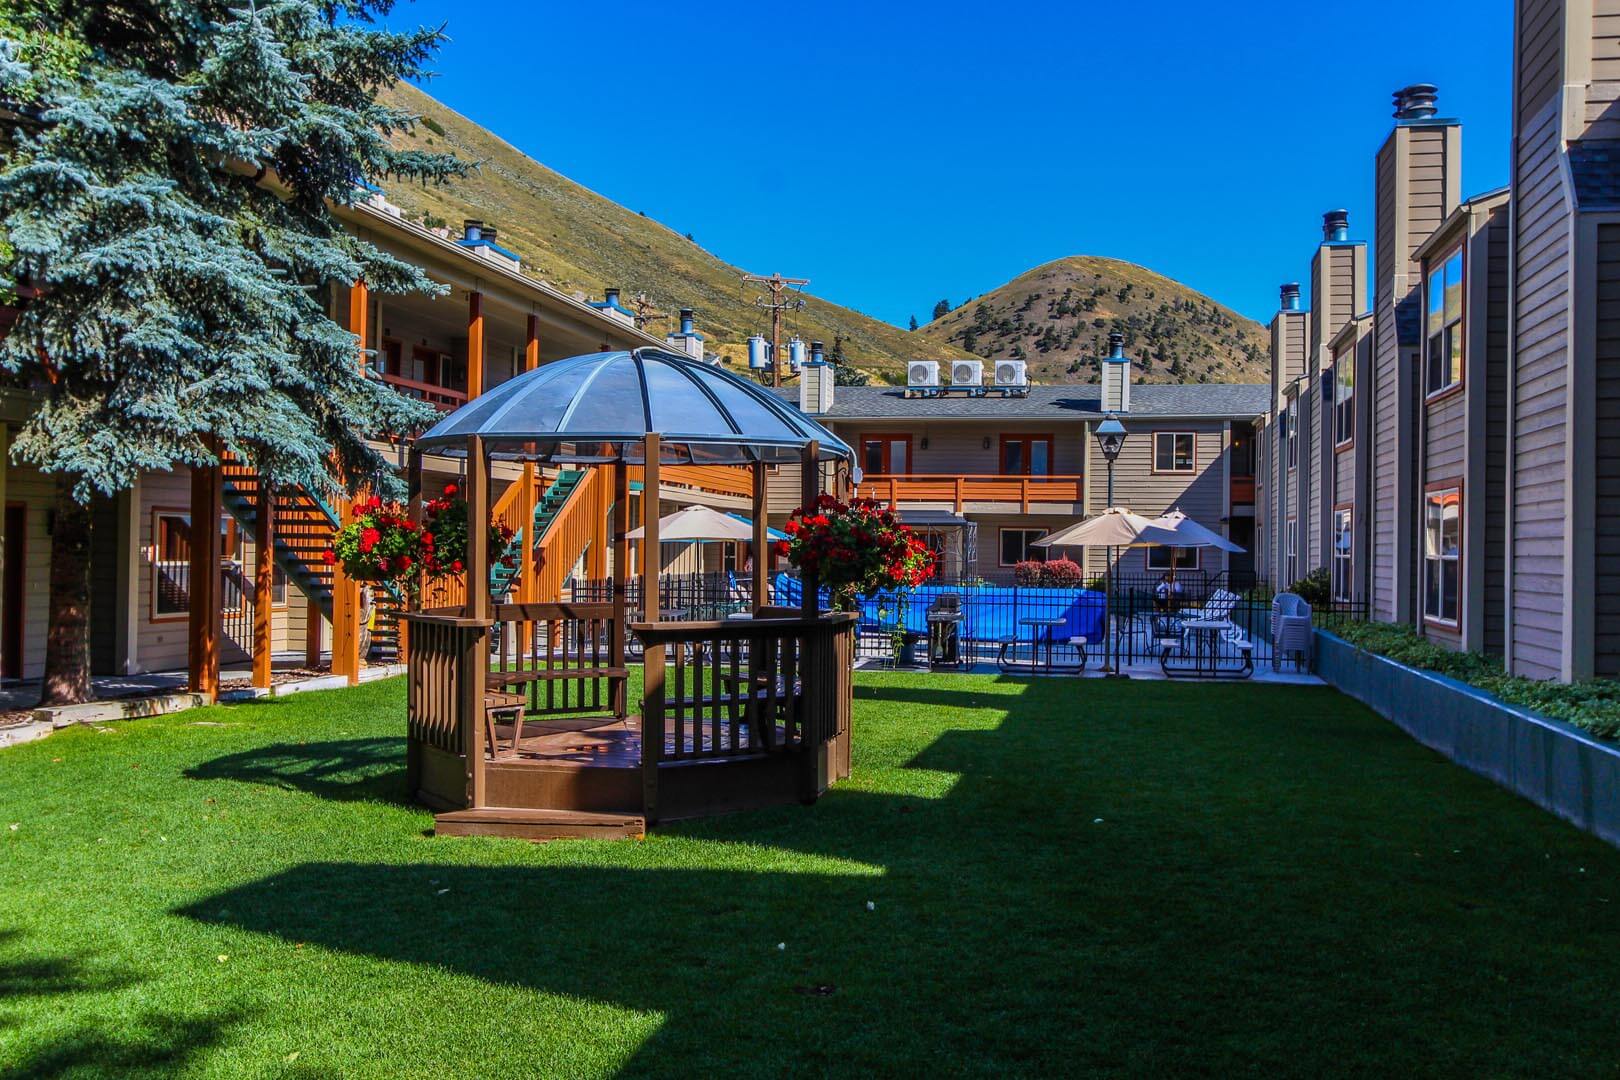 The exterior building and Gazebo at VRI's Jackson Hole Towncenter in Wyoming.